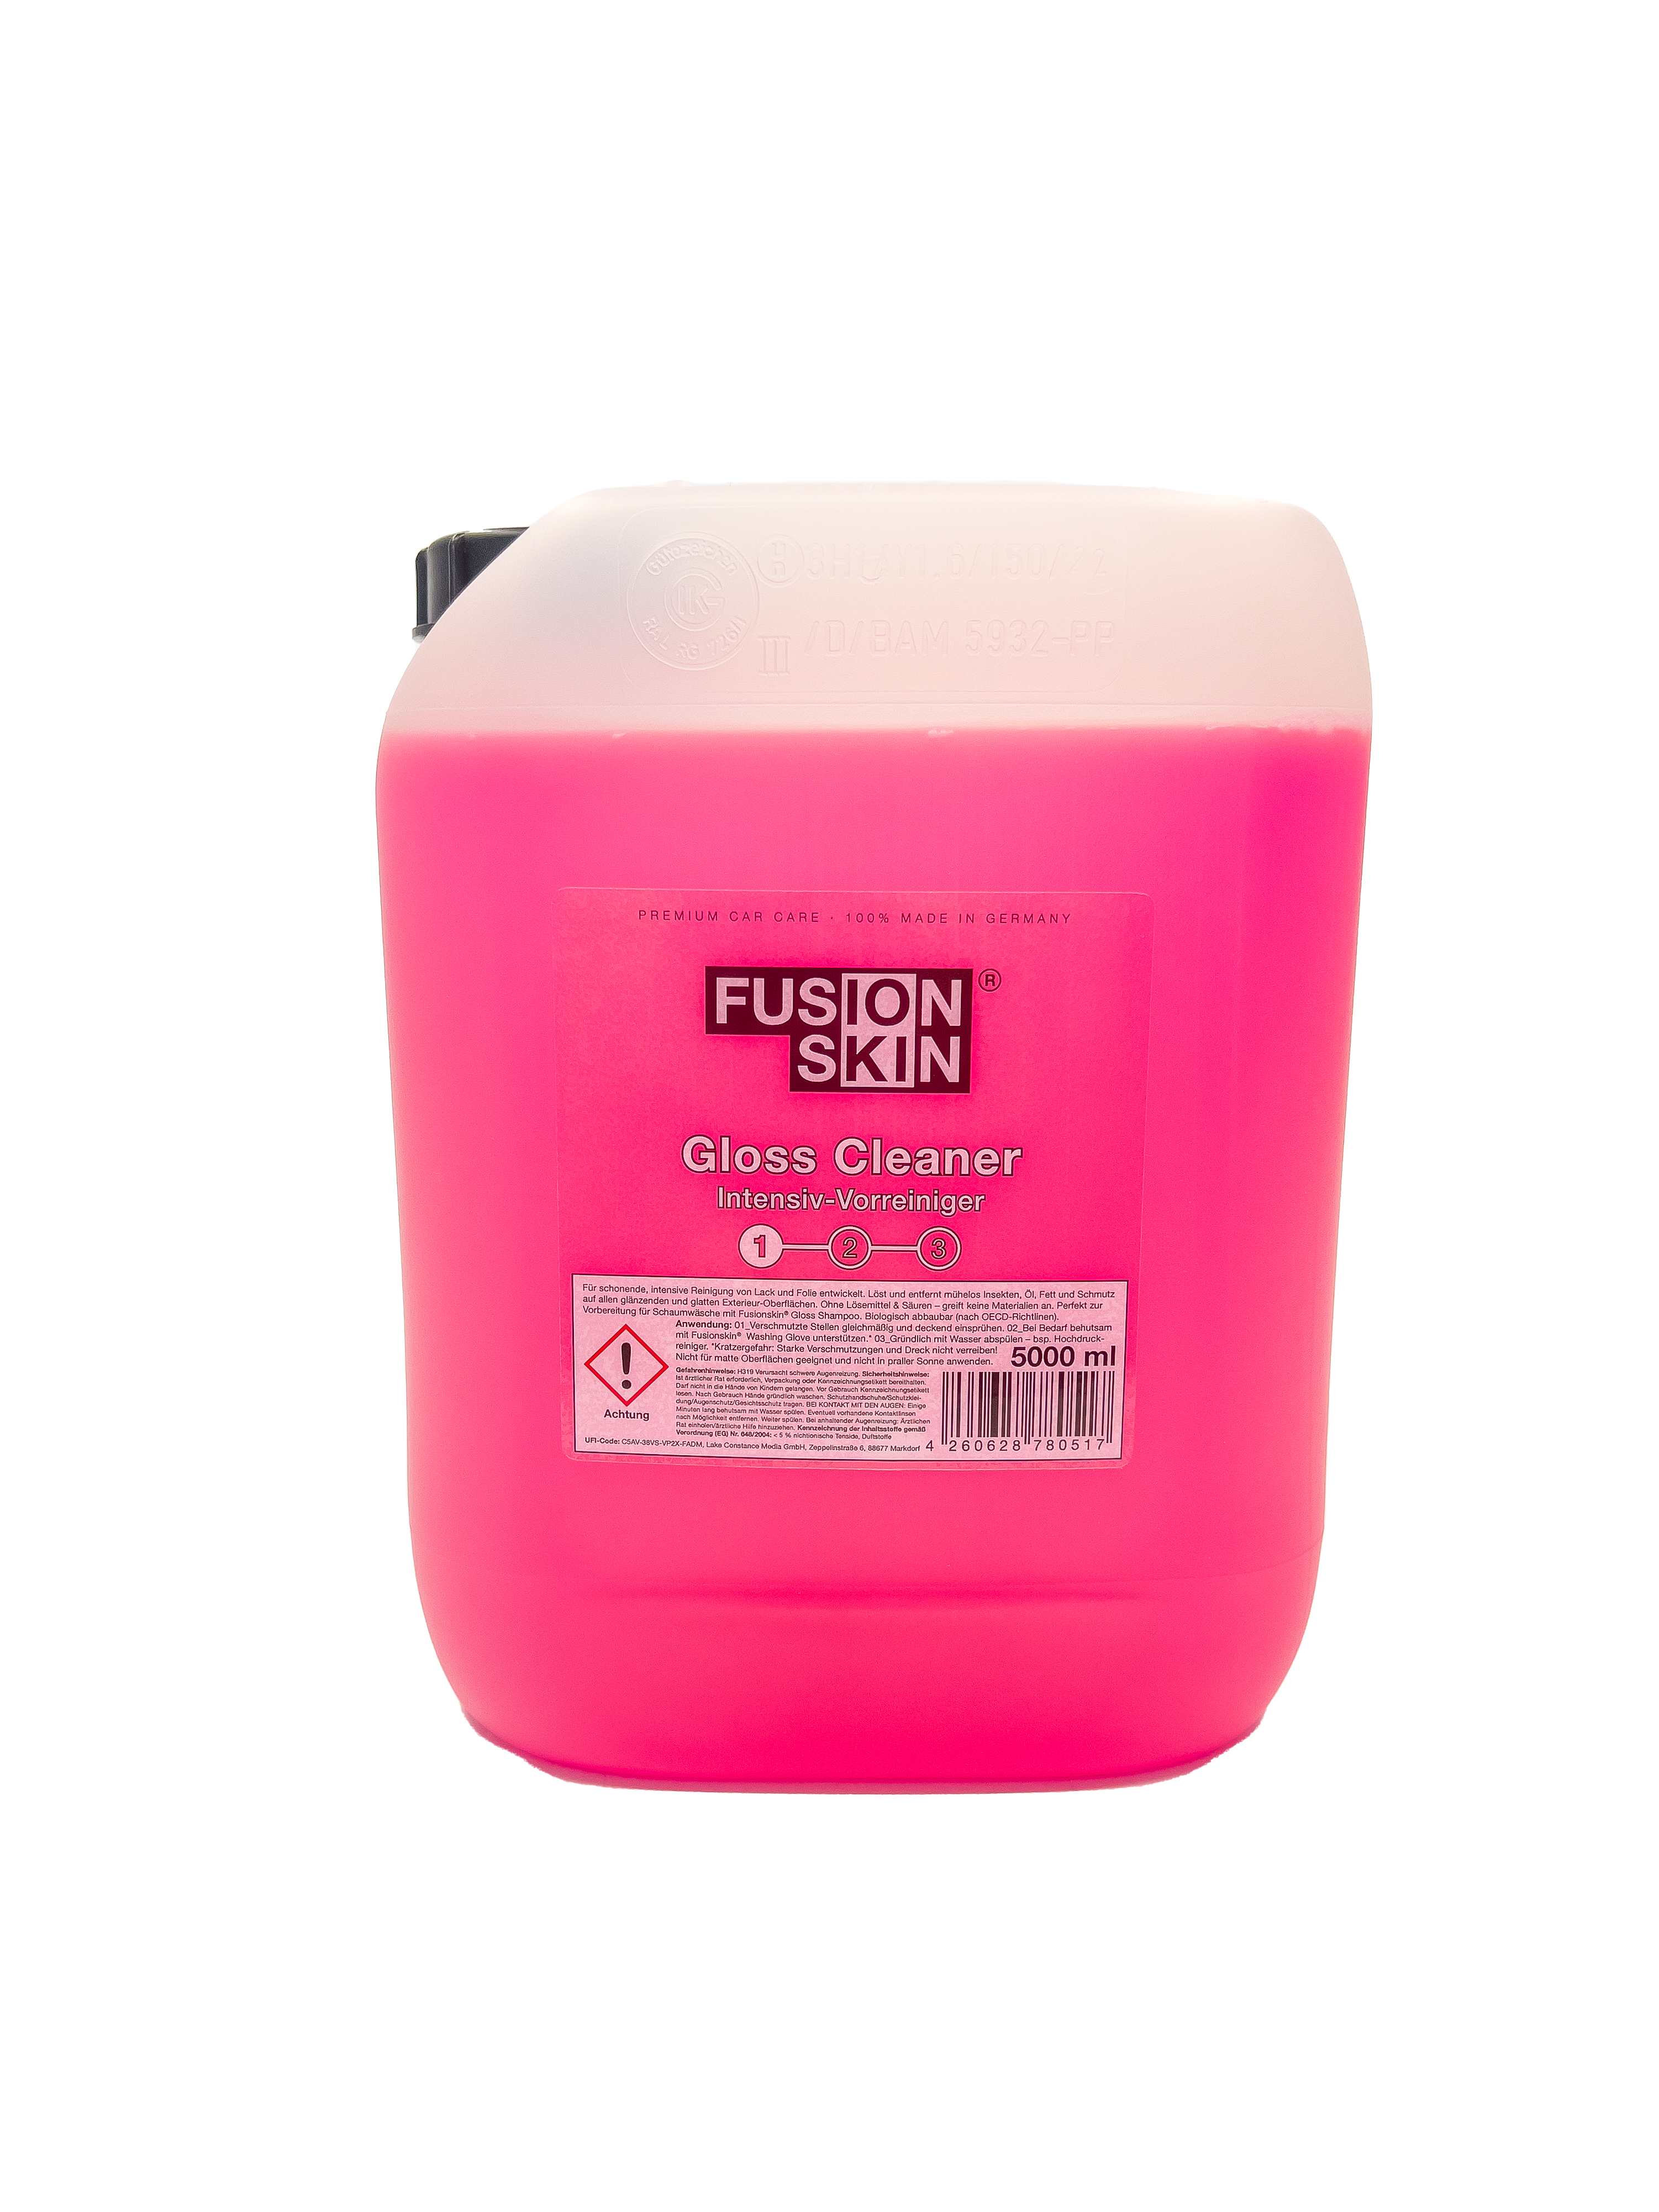 Fusionskin® Gloss Cleaner 5L